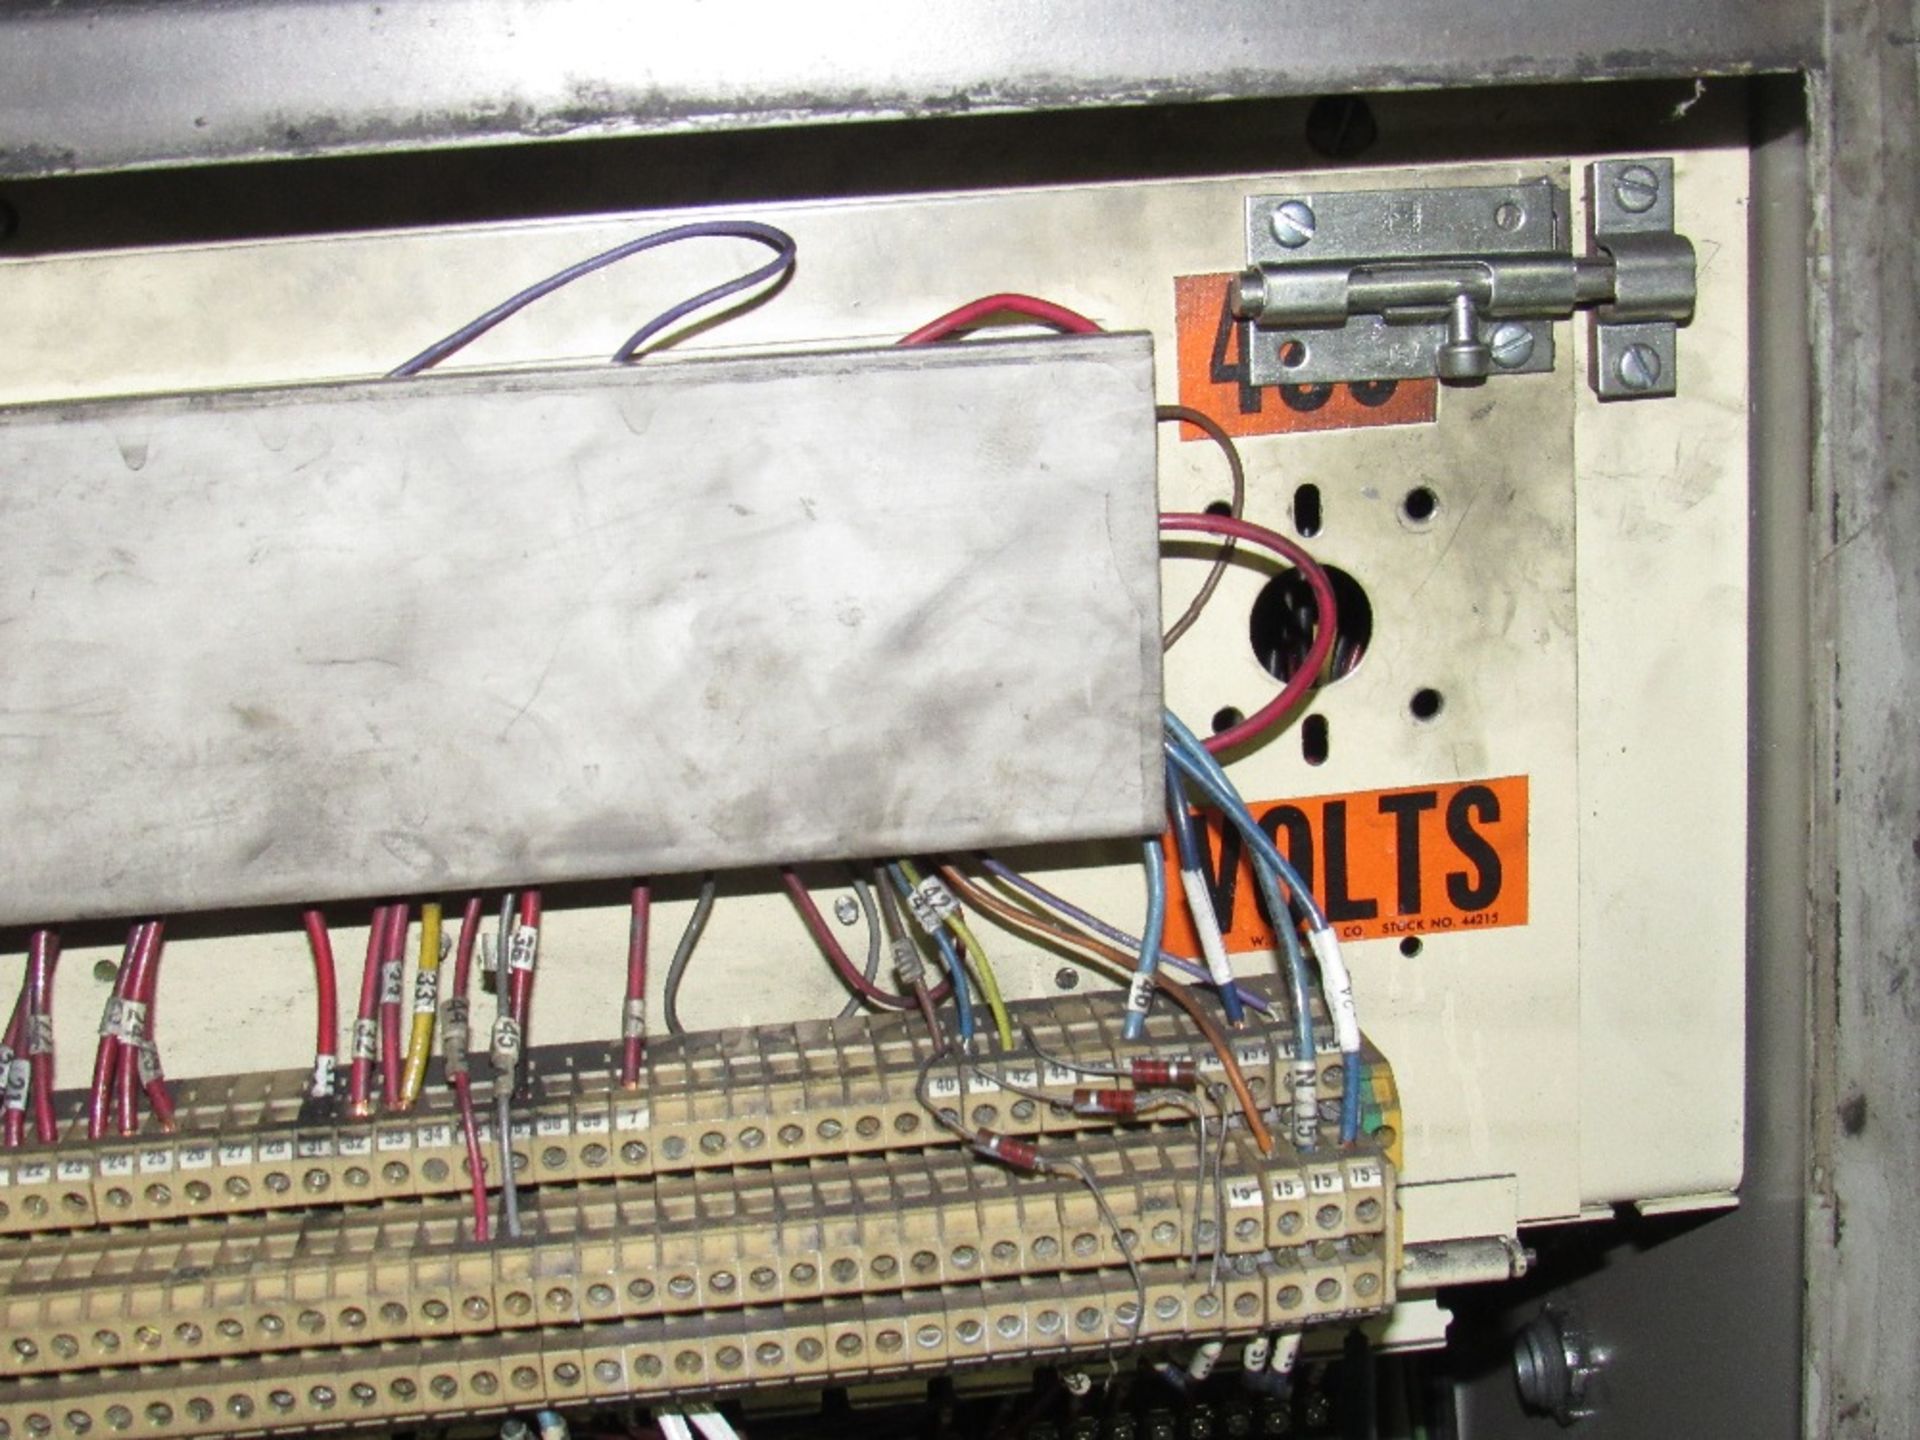 480V Electric Control Box with Misc. controller including VFD, Disconnect, etc. -- (RIGGING INCLUDED - Image 28 of 36